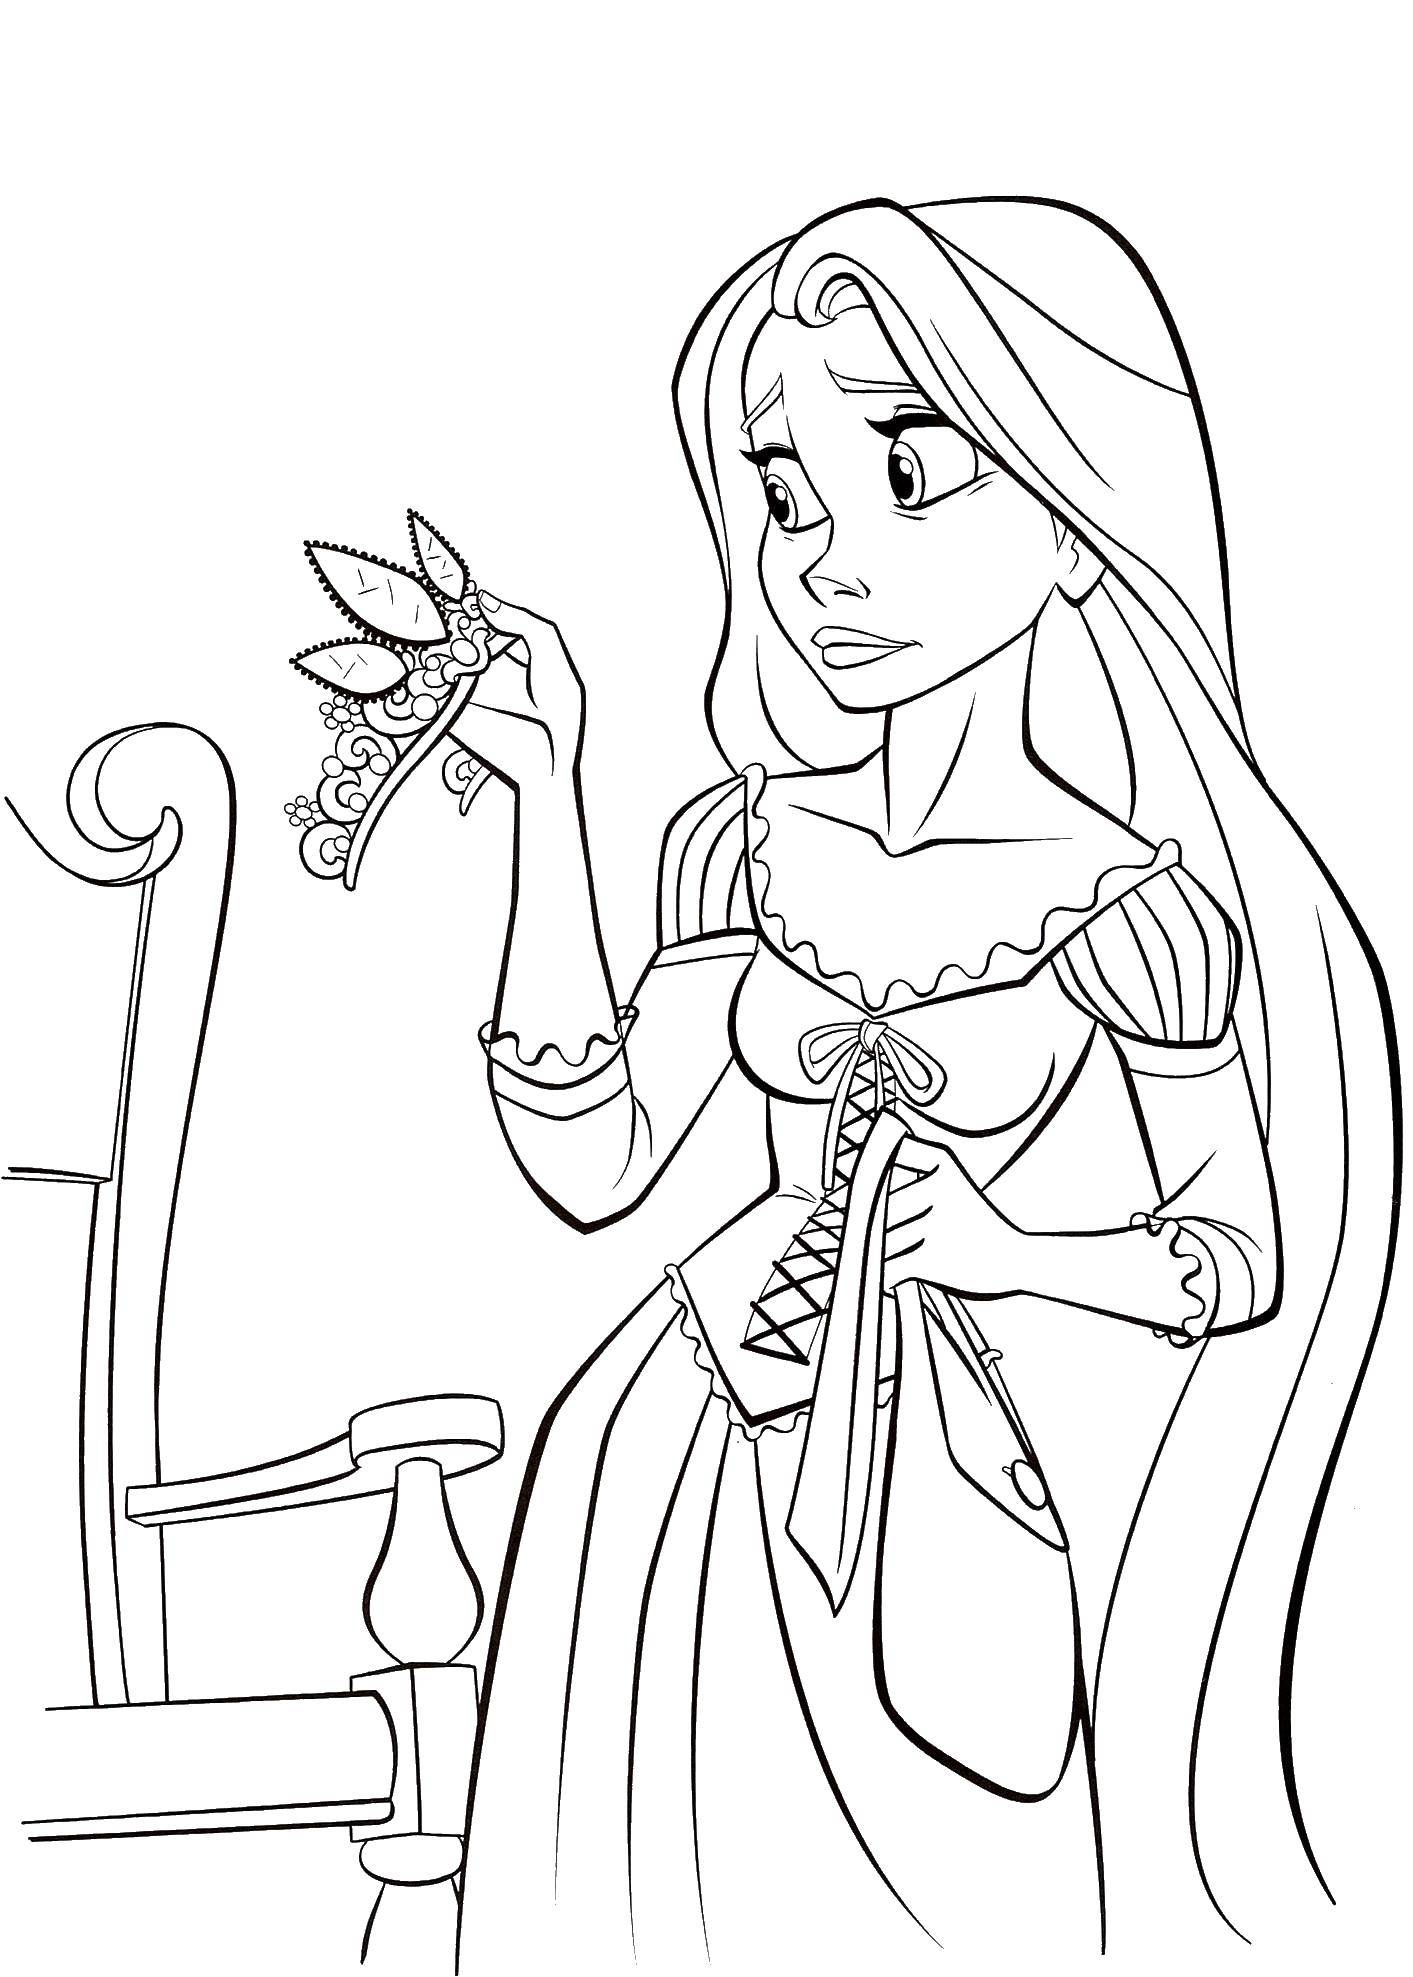 Coloring Rapunzel with the crown. Category Princess. Tags:  Princess, Rapunzel, hair, crown.